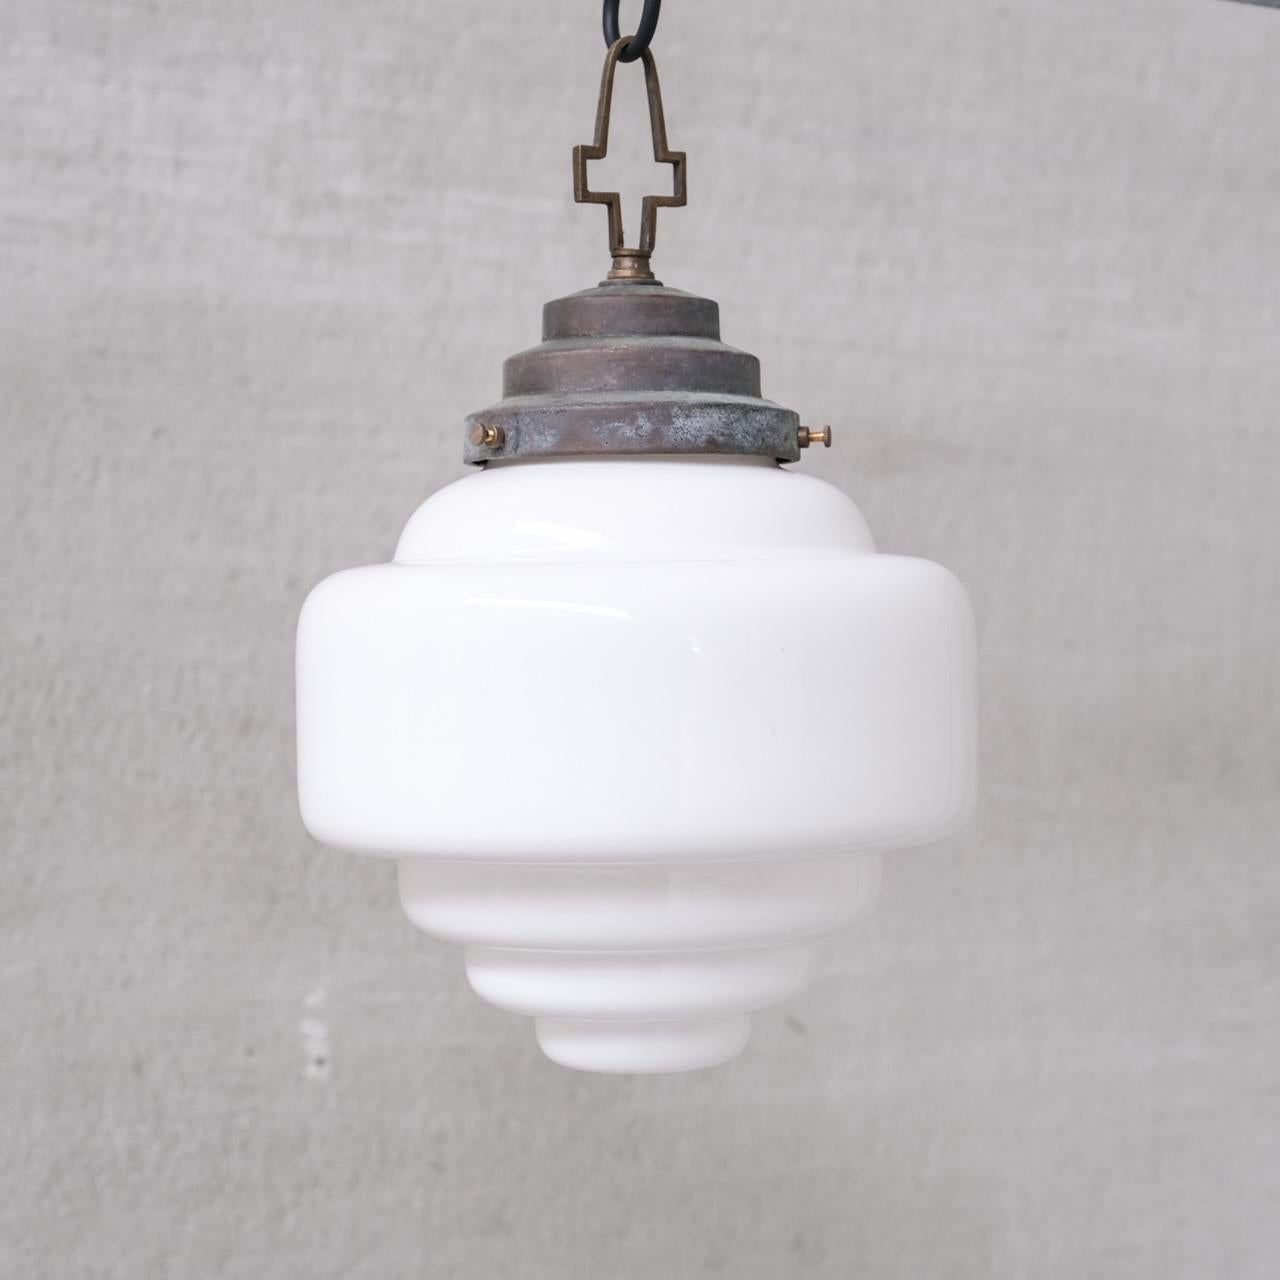 Mid-20th Century Stepped Glass Opaline Pendant Light For Sale